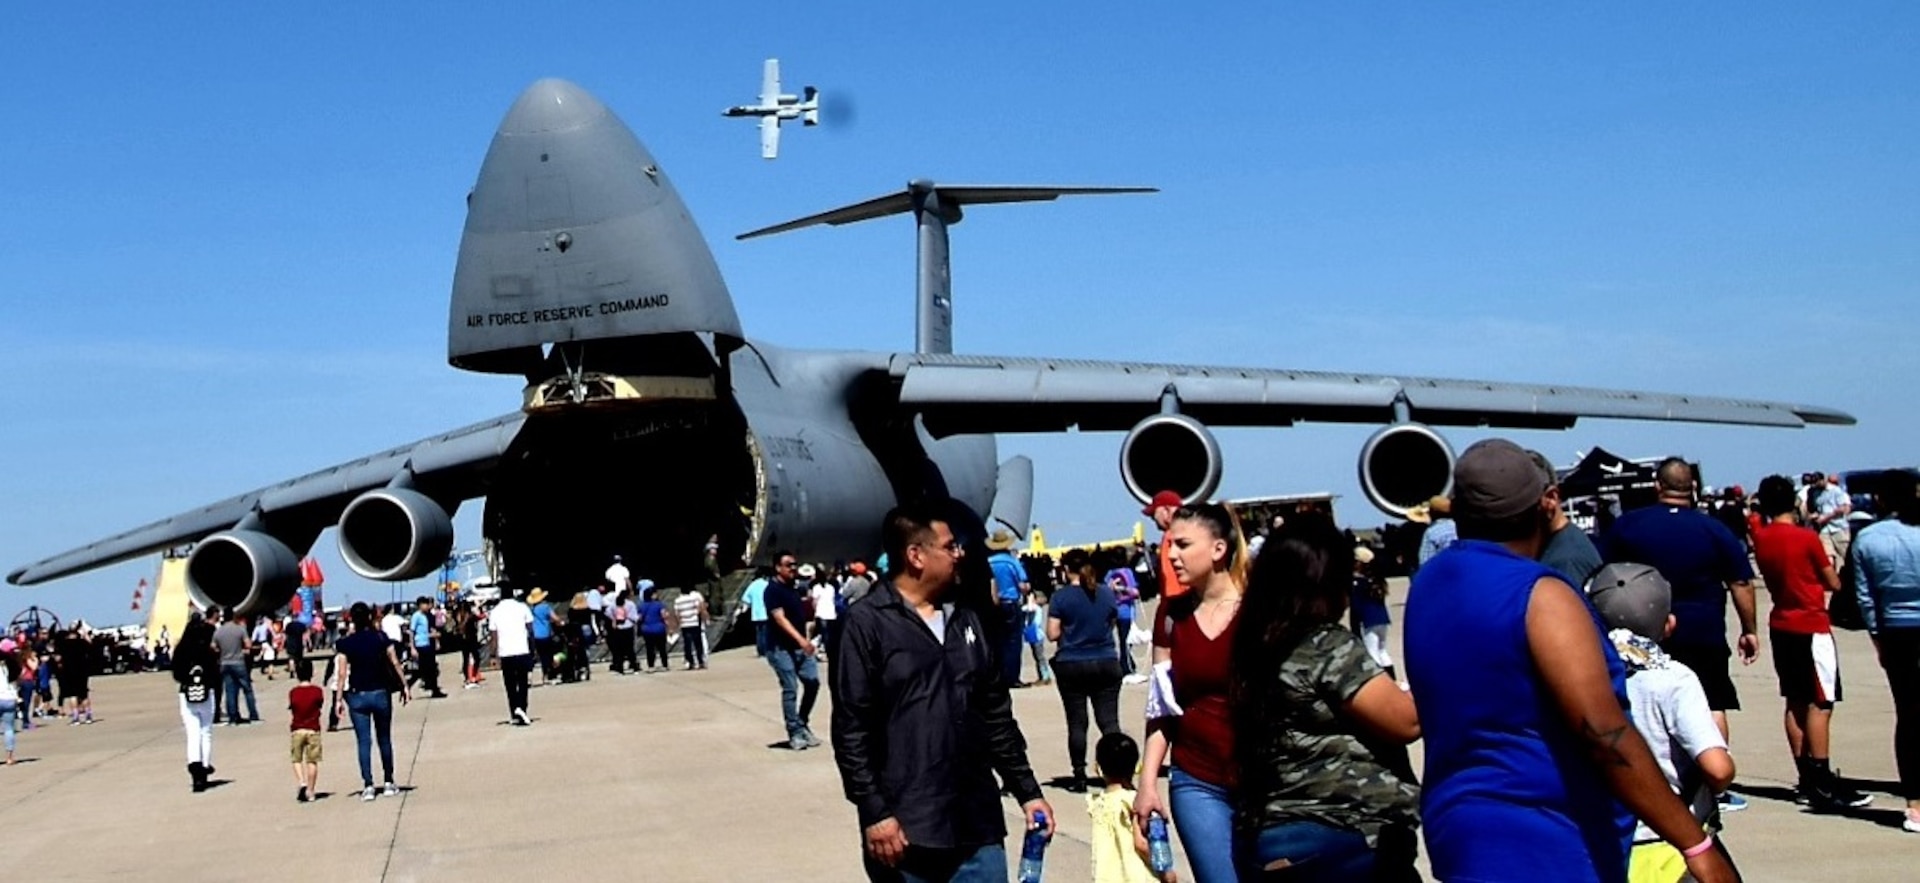 Spectators walk to a 433rd Airlift Wing’s C-5M Super Galaxy from Joint Base San Antonio-Lackland while an A-10C Thunderbolt II performs during the Washington’s Birthday Celebration Association Stars and Stripes Air Show Spectacular at the Laredo International Airport in Laredo, Texas Feb. 17. The A-10 belongs to the A-10C Thunderbolt II Demonstration Team from Davis-Monthan Air Force Base, Arizona.